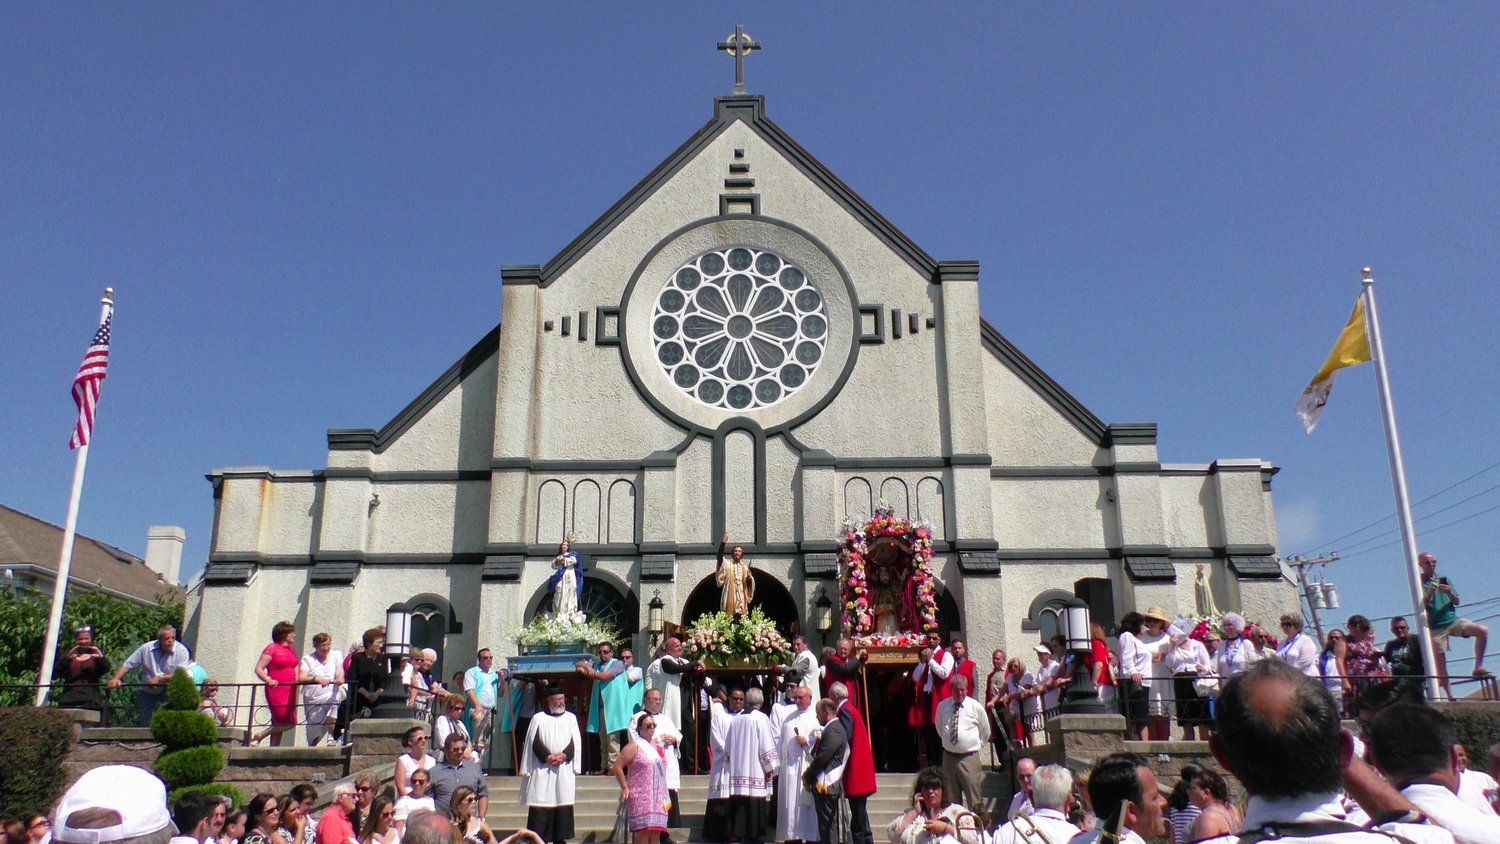 To honor their patron, St. Francis Xavier, this parish in East Providence offers one of the largest Portuguese feasts in Rhode Island.